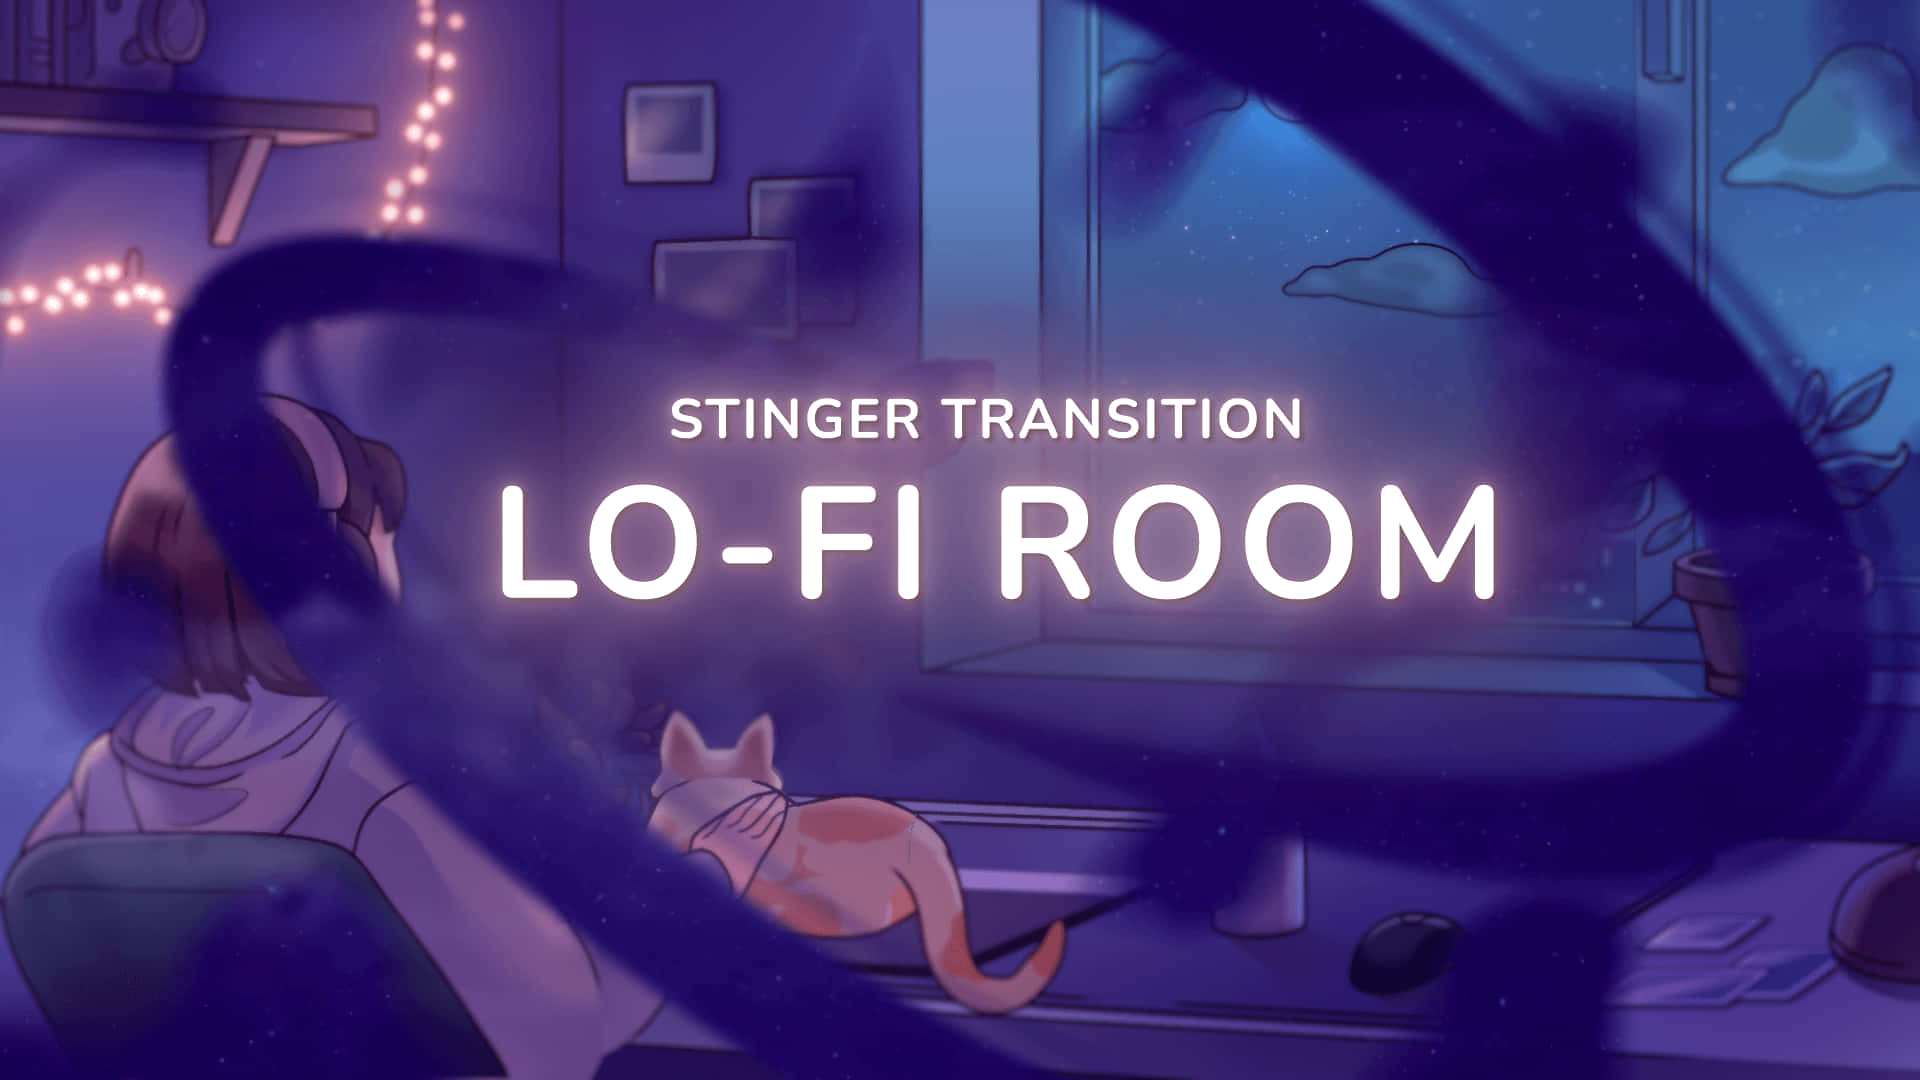 Unwind in an intimate nook in the cozy lo-fi room Wallpaper